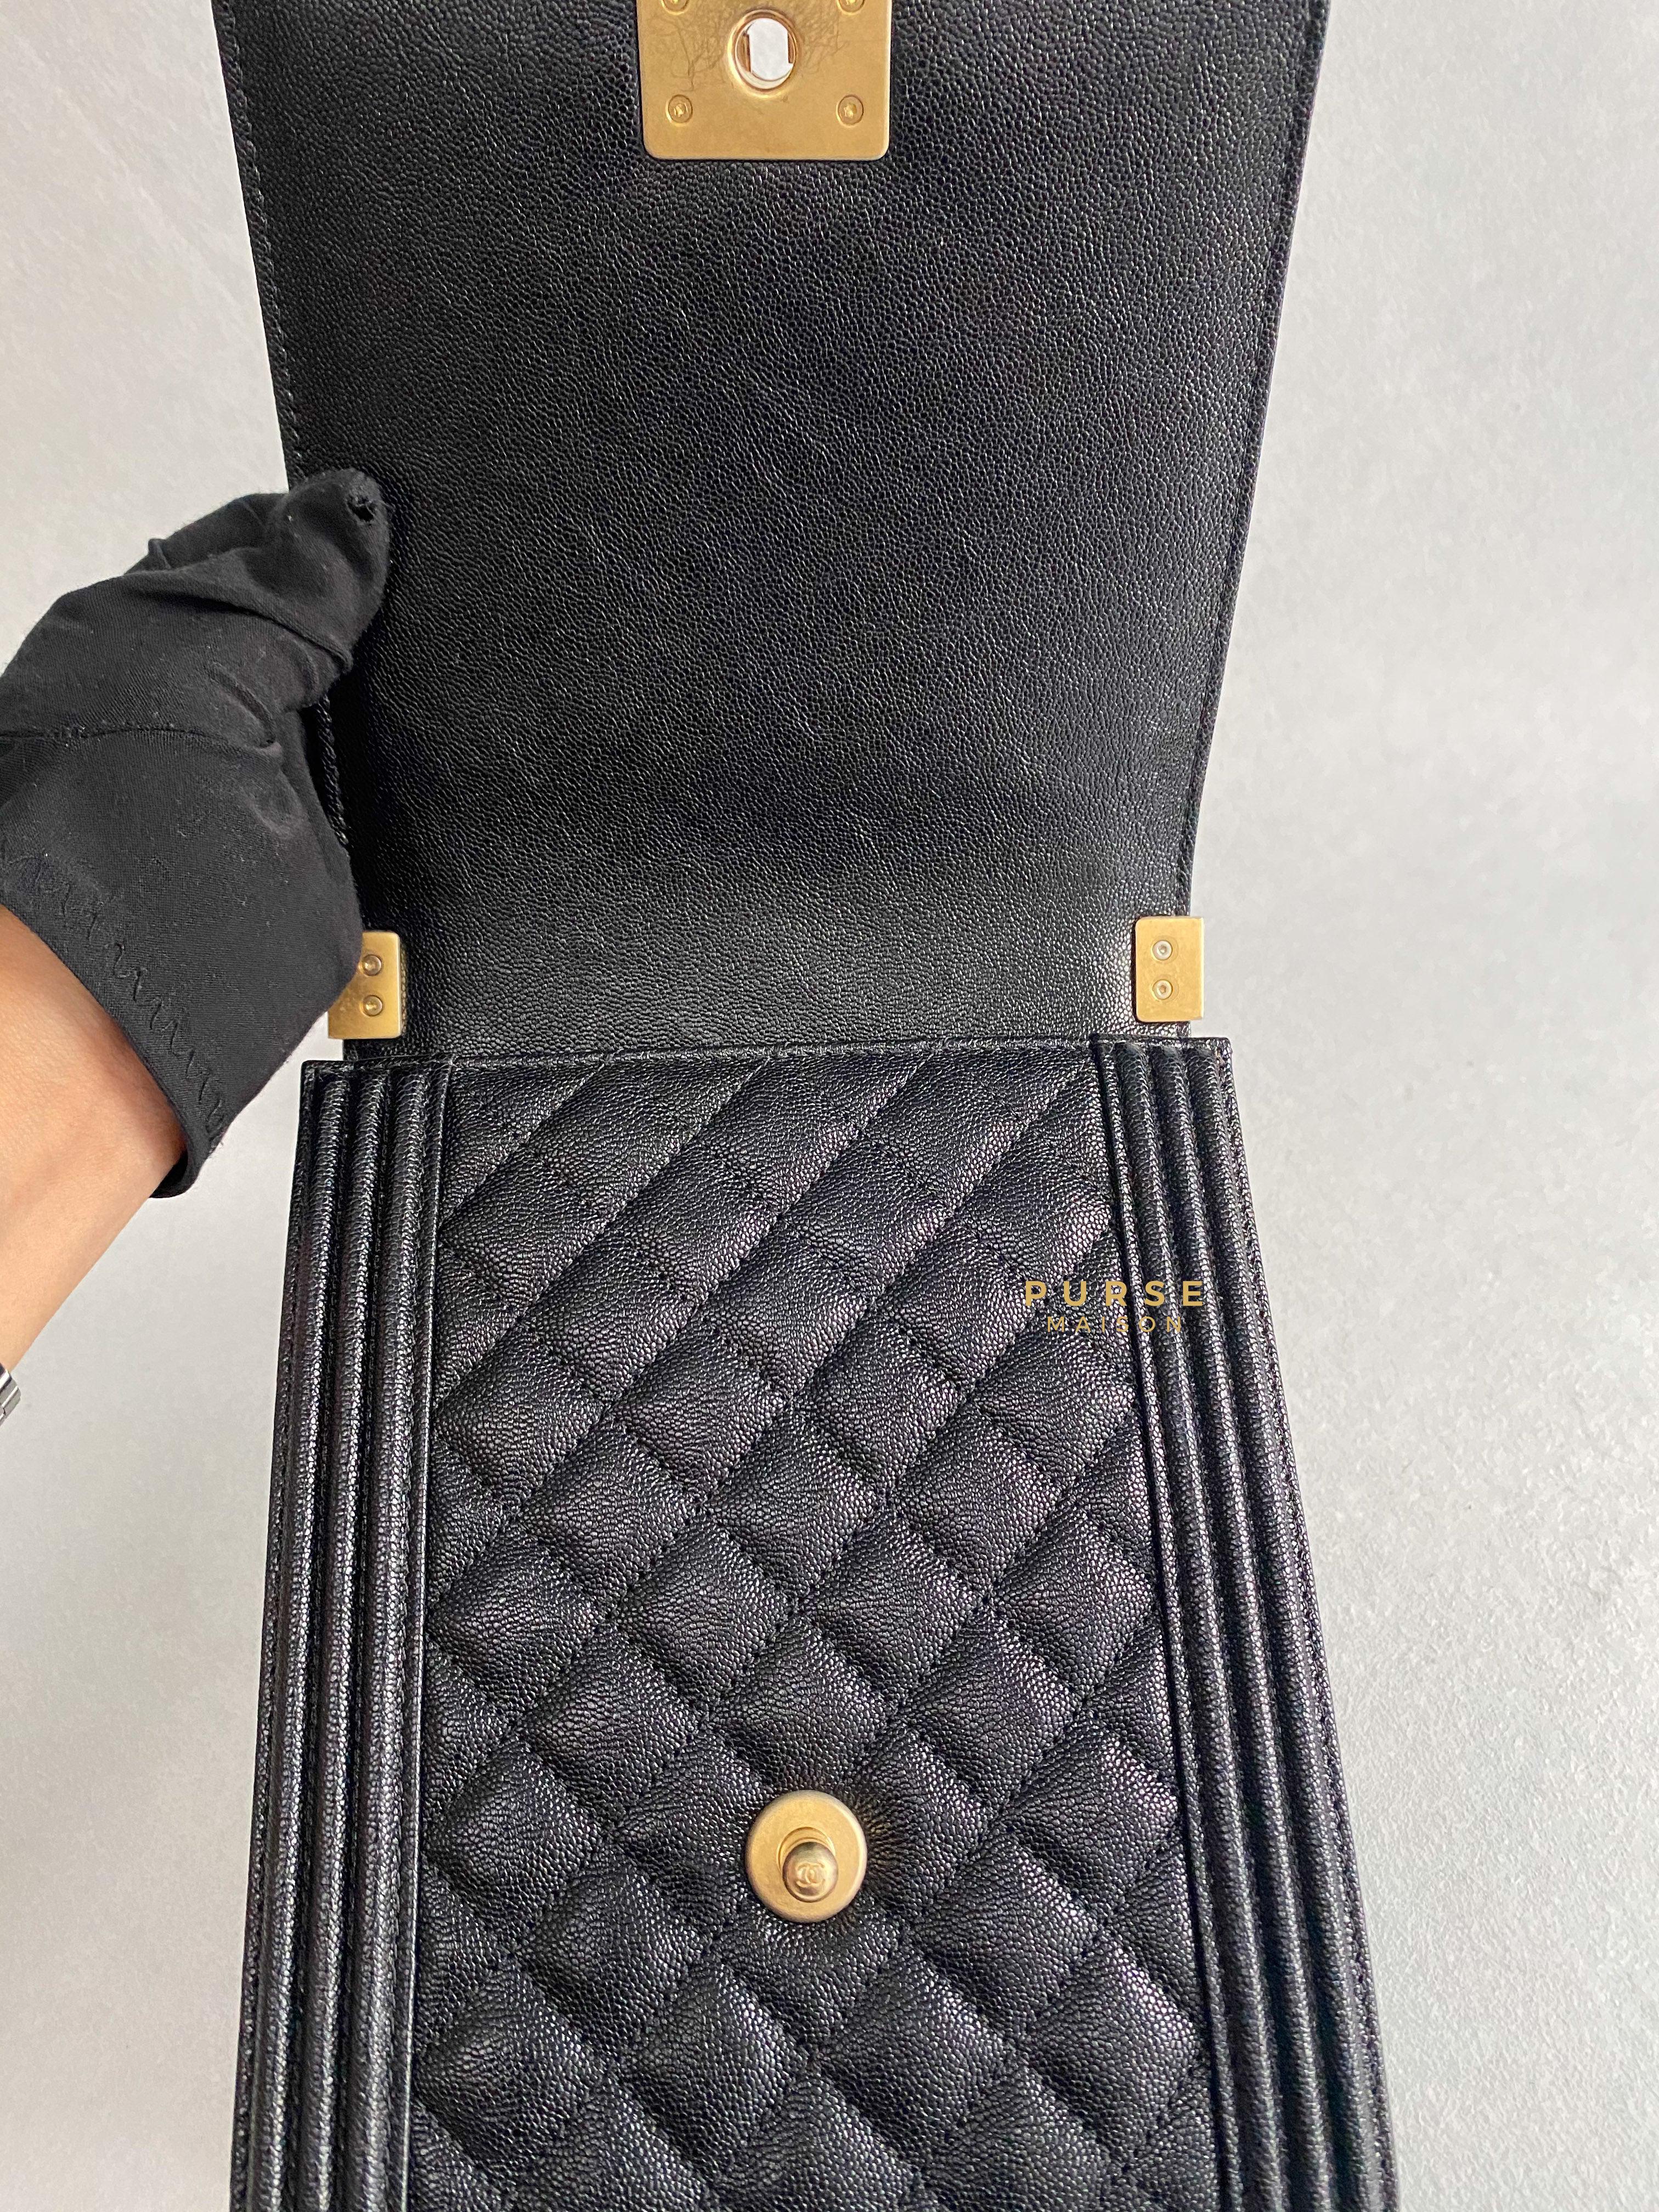 Chanel Cruise Boy North South in Black Caviar Leather and Aged Gold Hardware Series 26 | Purse Maison Luxury Bags Shop